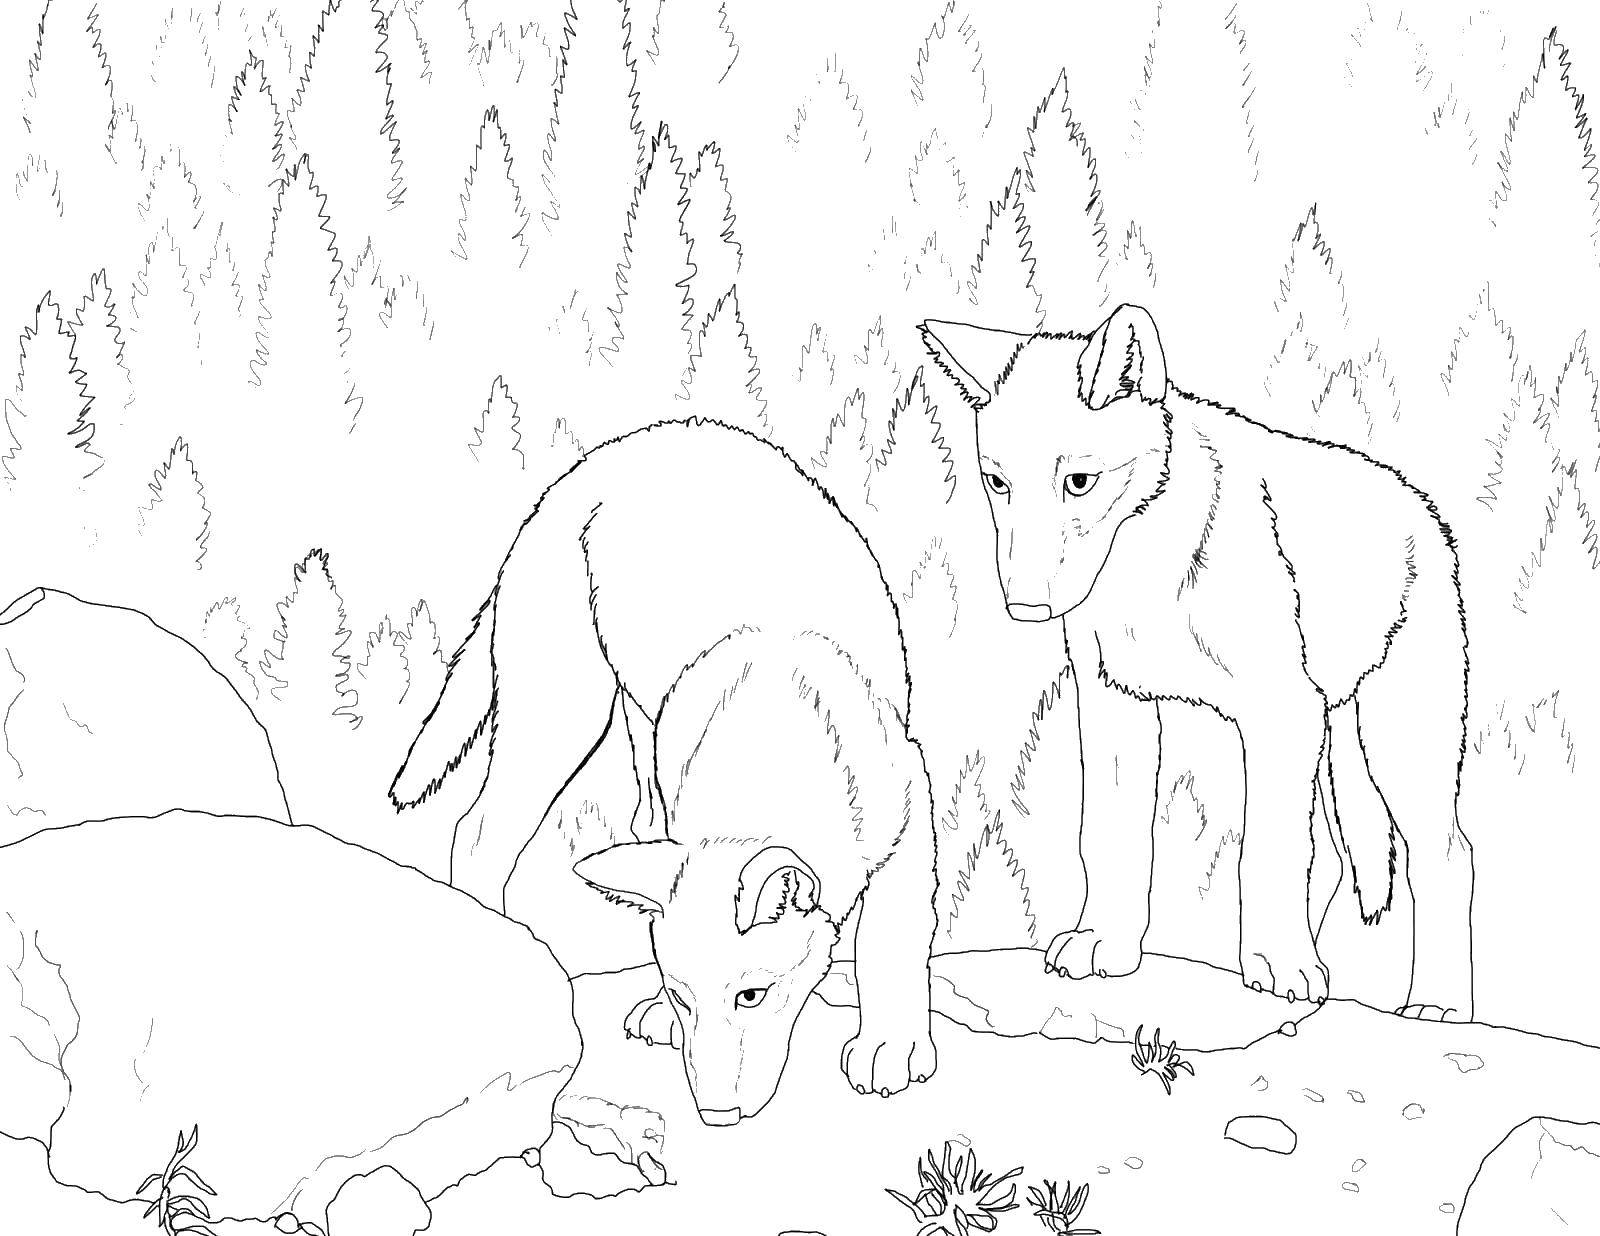 Coloring Wolves in the woods. Category wild animals. Tags:  wolves.